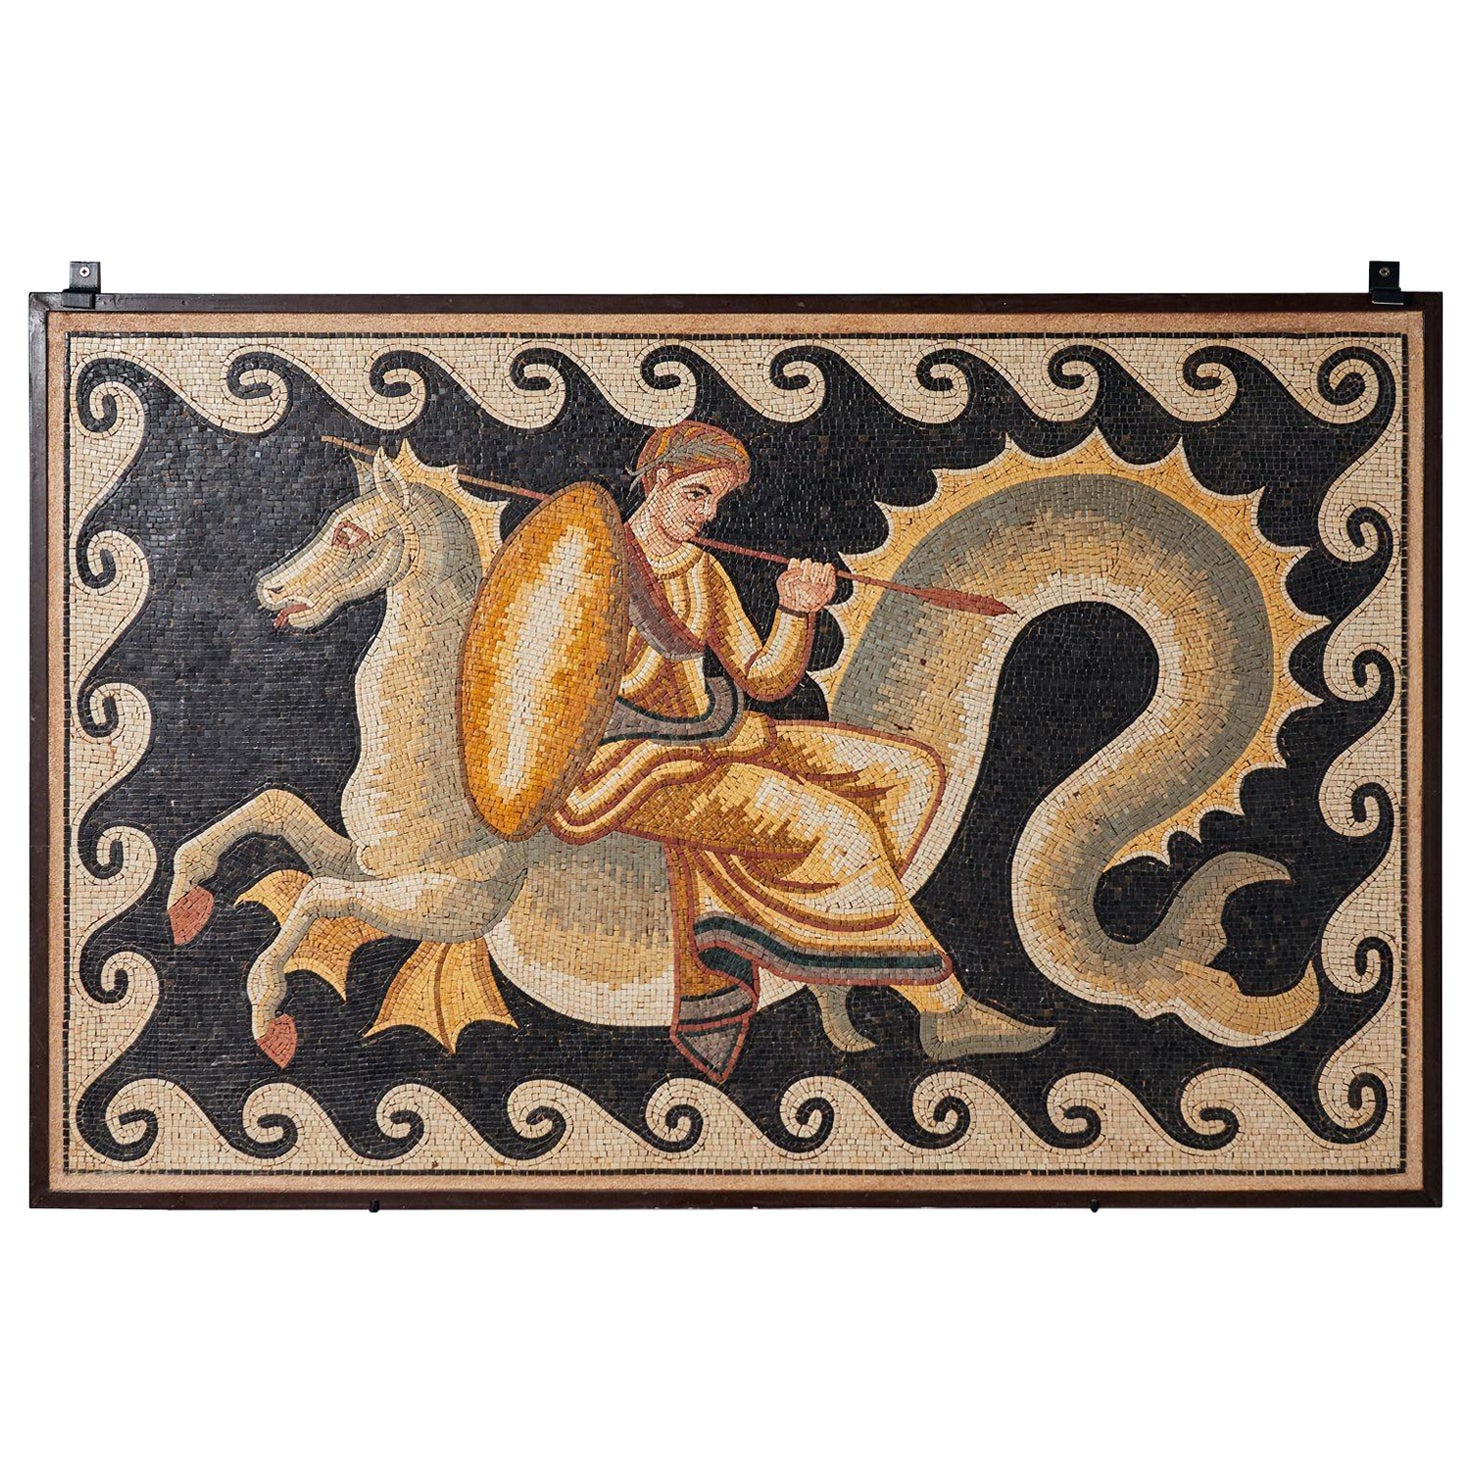 Antique Style Greek Mosaic Depicting Thetis For Sale